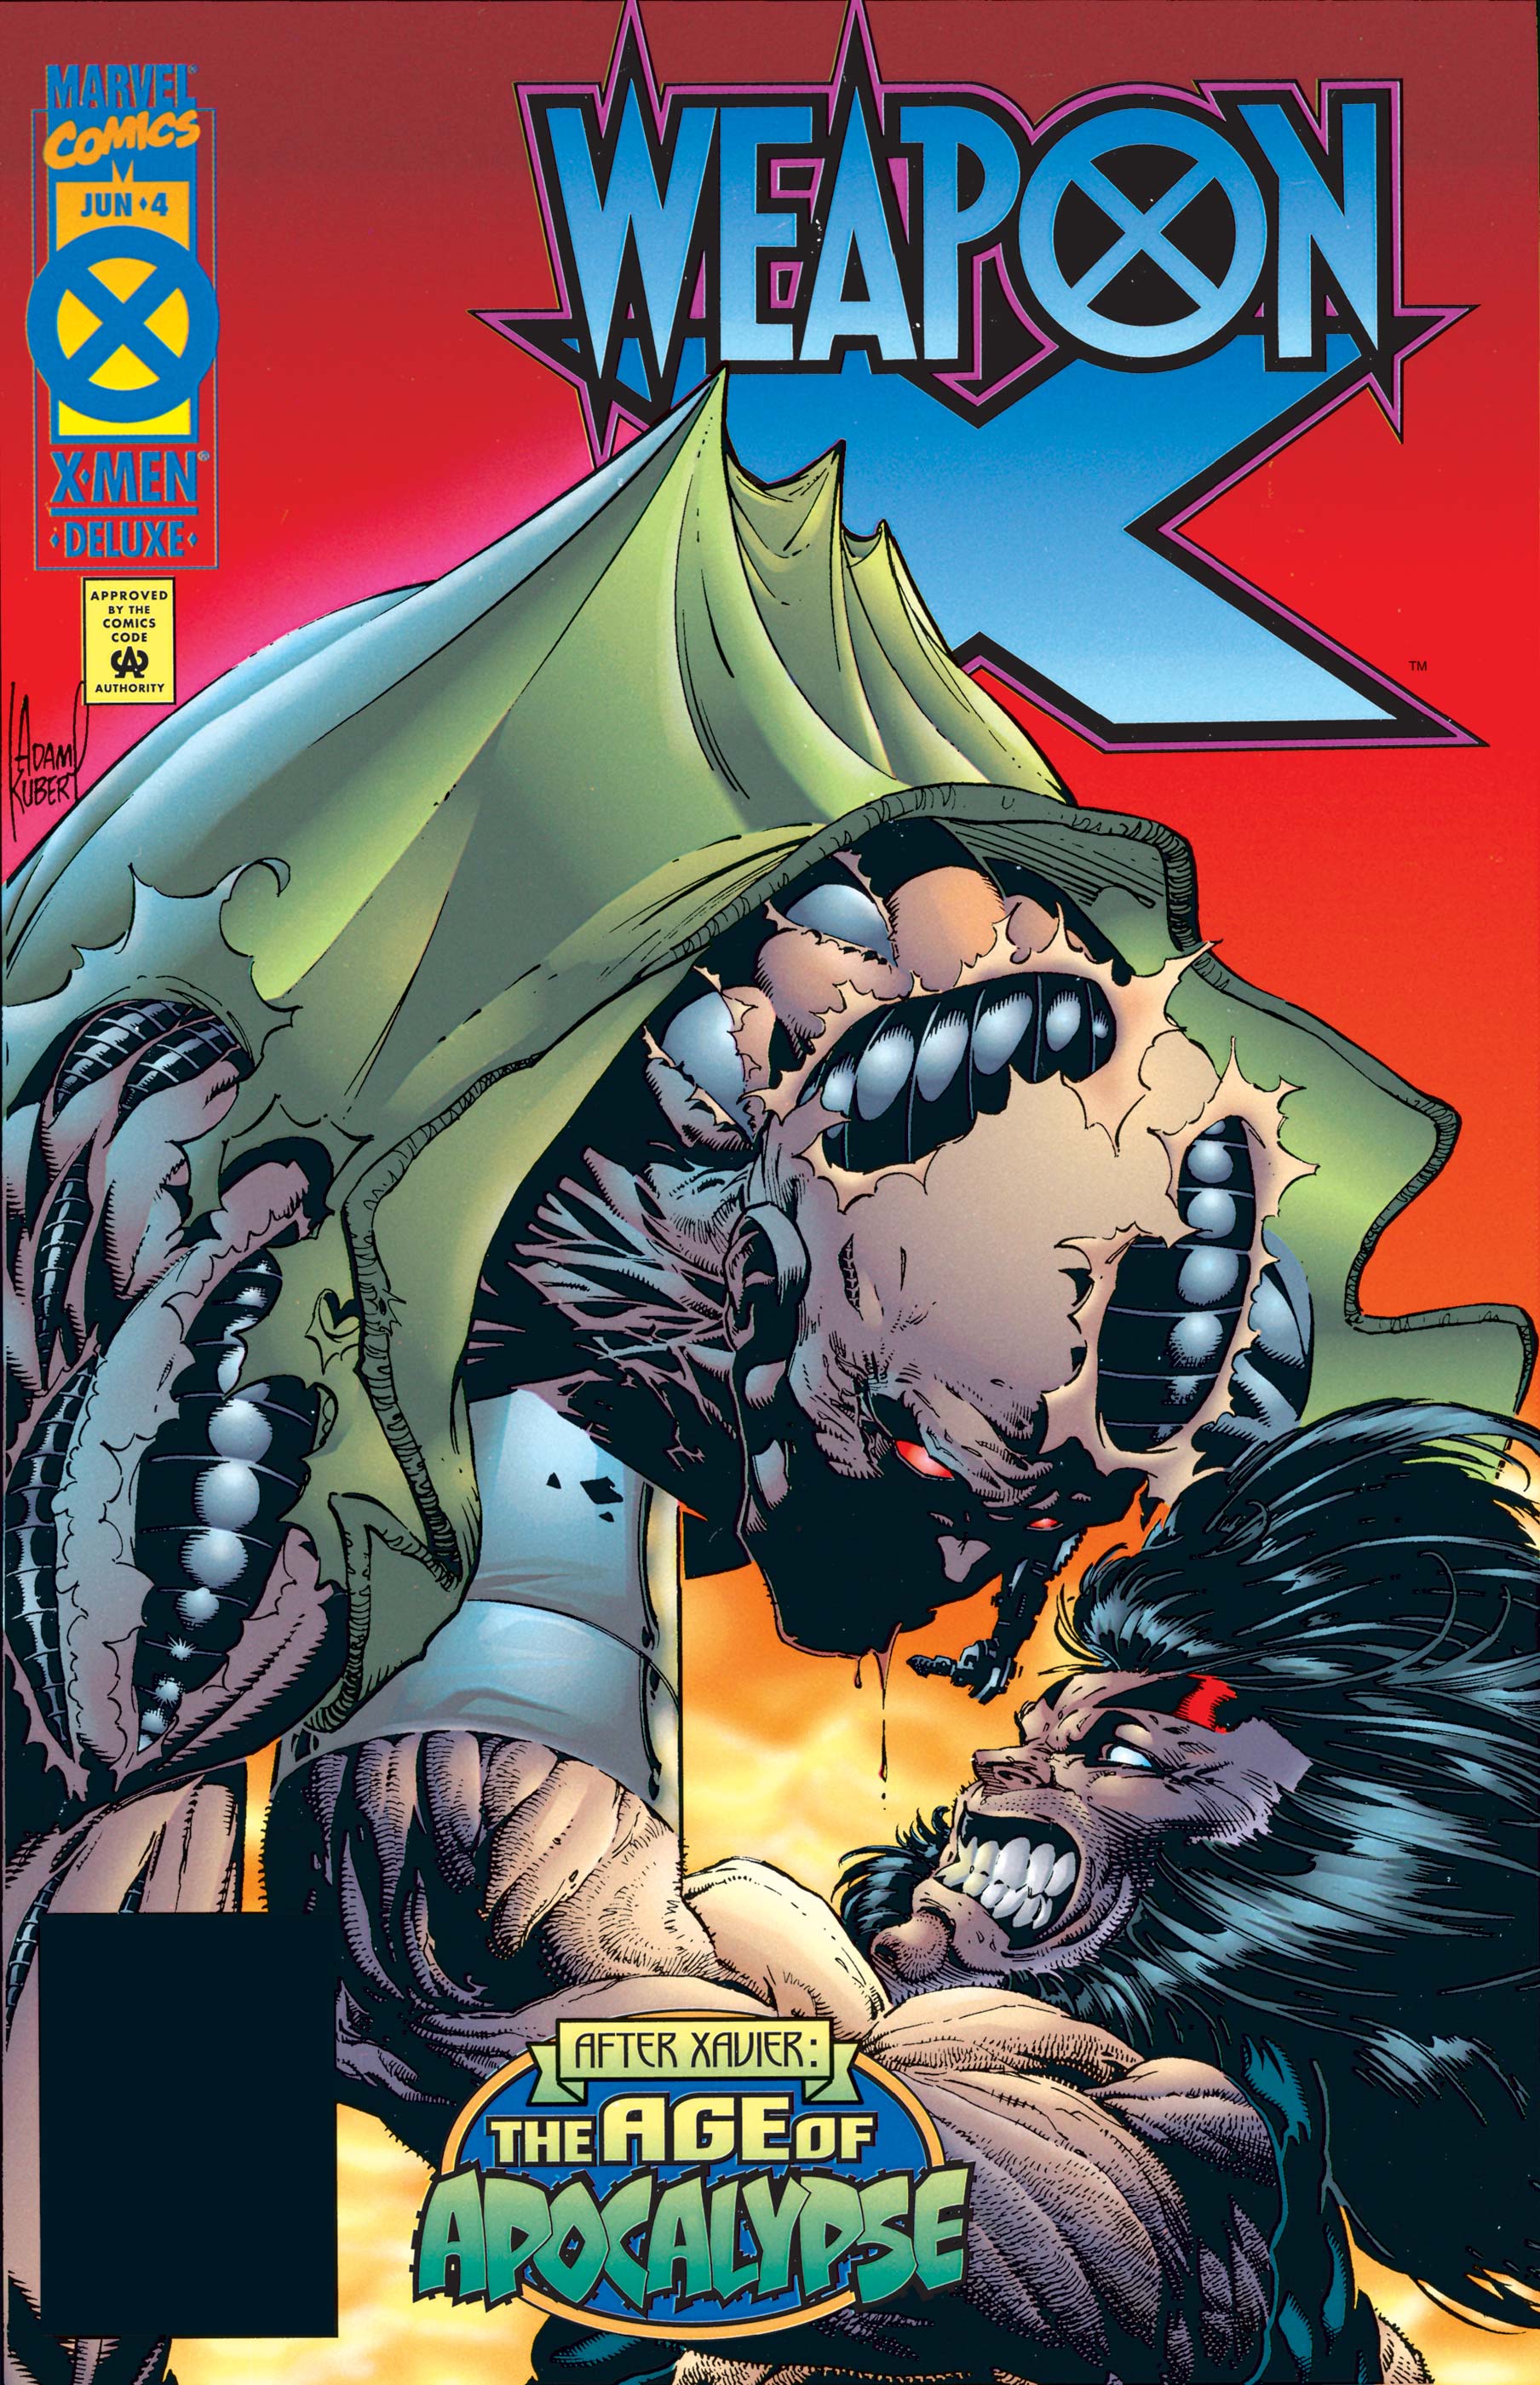 Weapon X (1995) #4